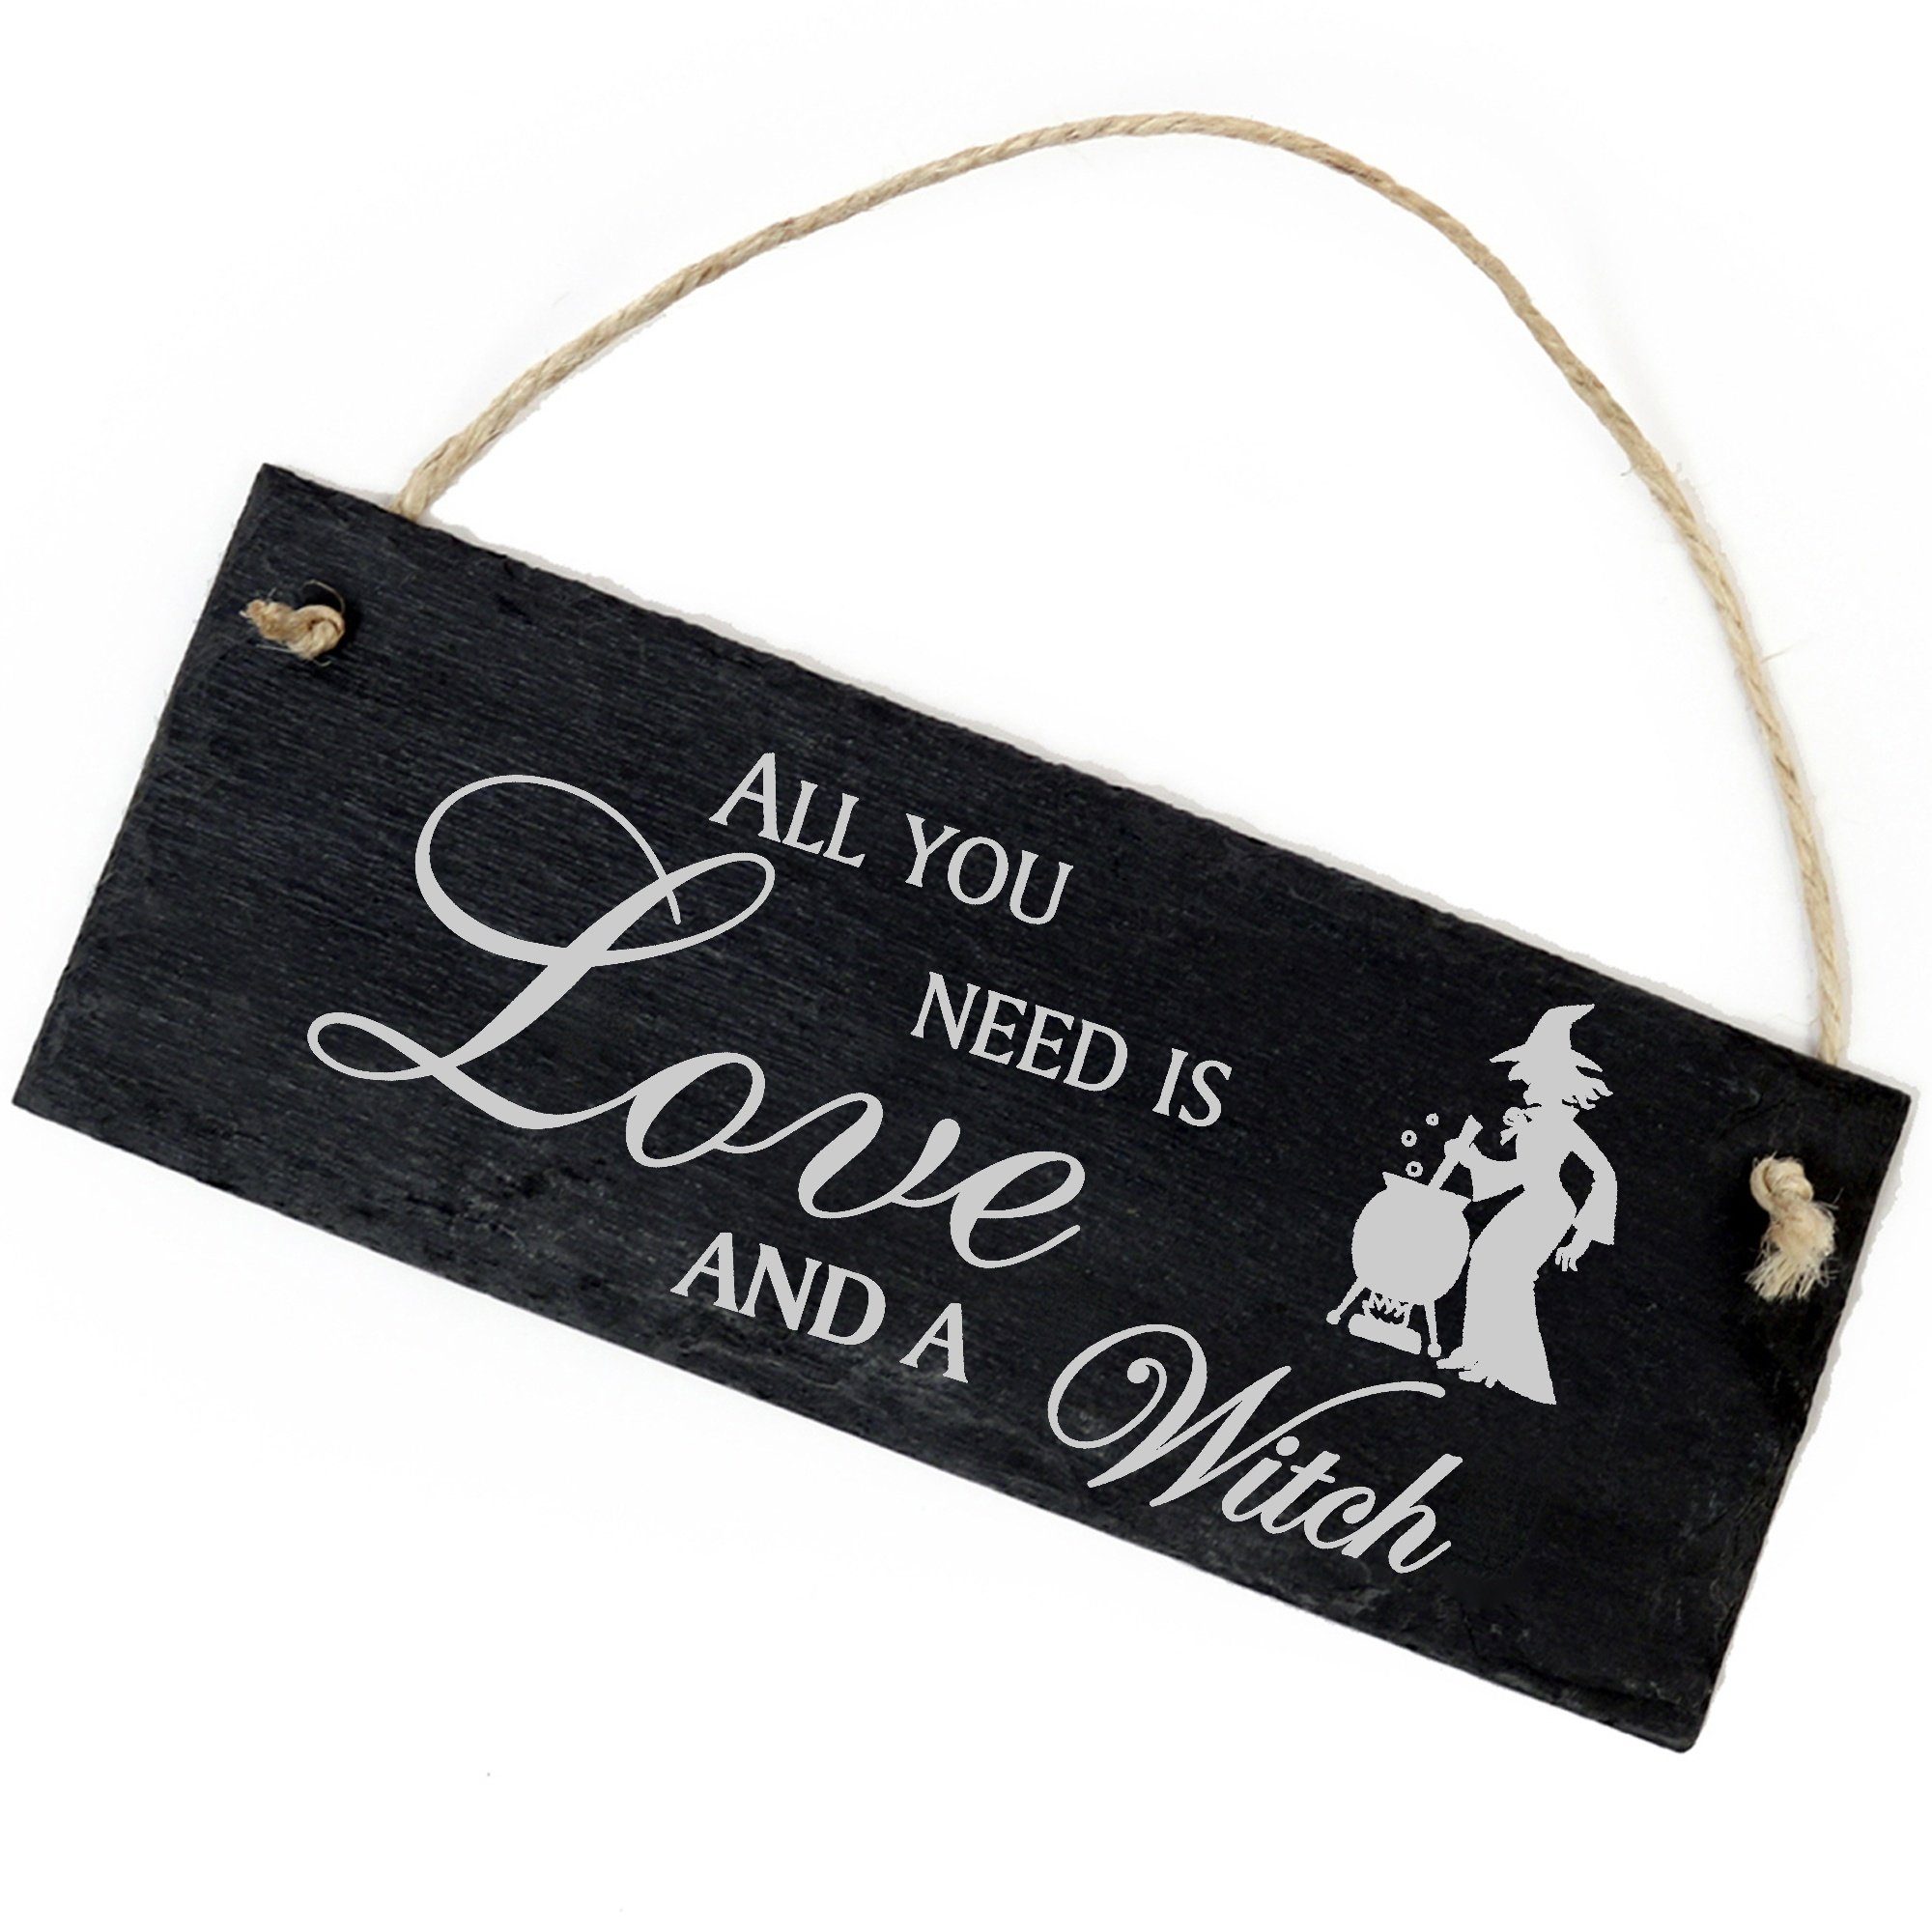 Dekolando Hängedekoration Hexe am Kessel 22x8cm All you need is Love and a Witch